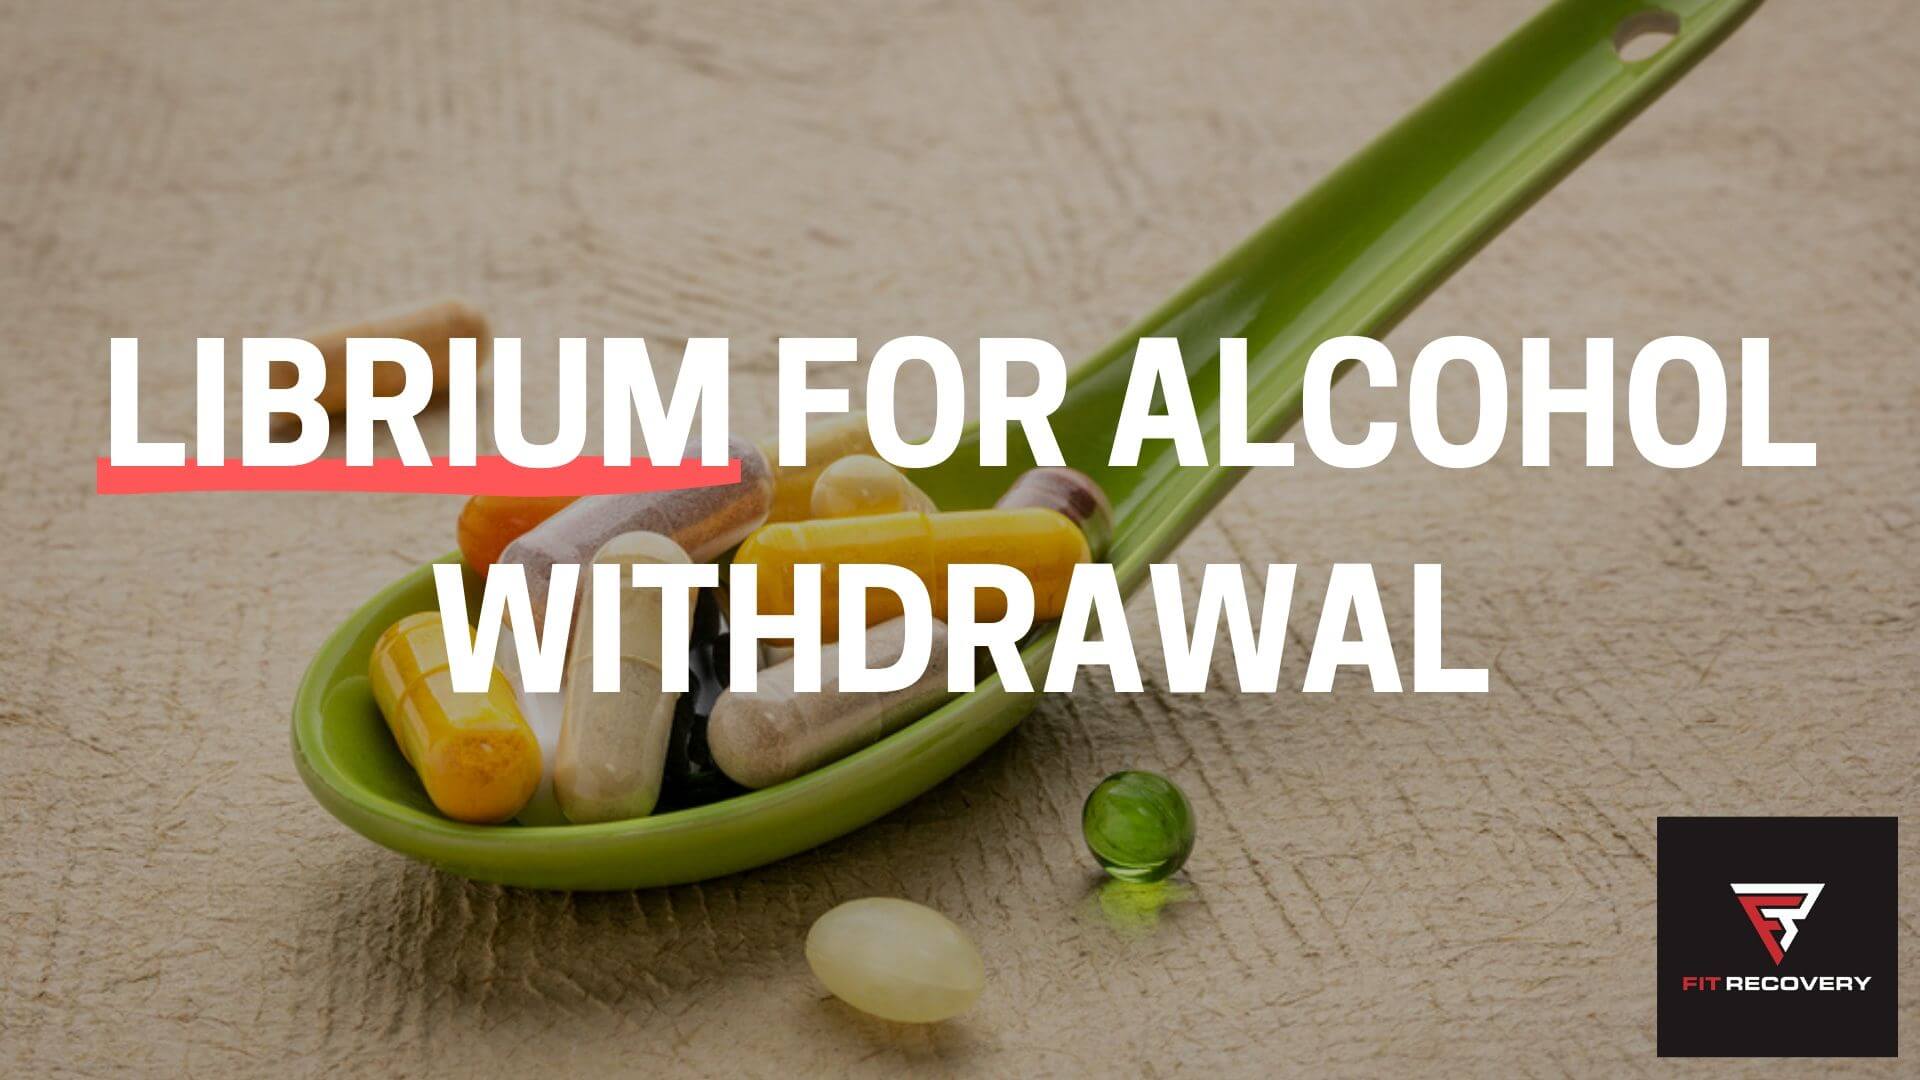 Librium for alcohol withdrawal